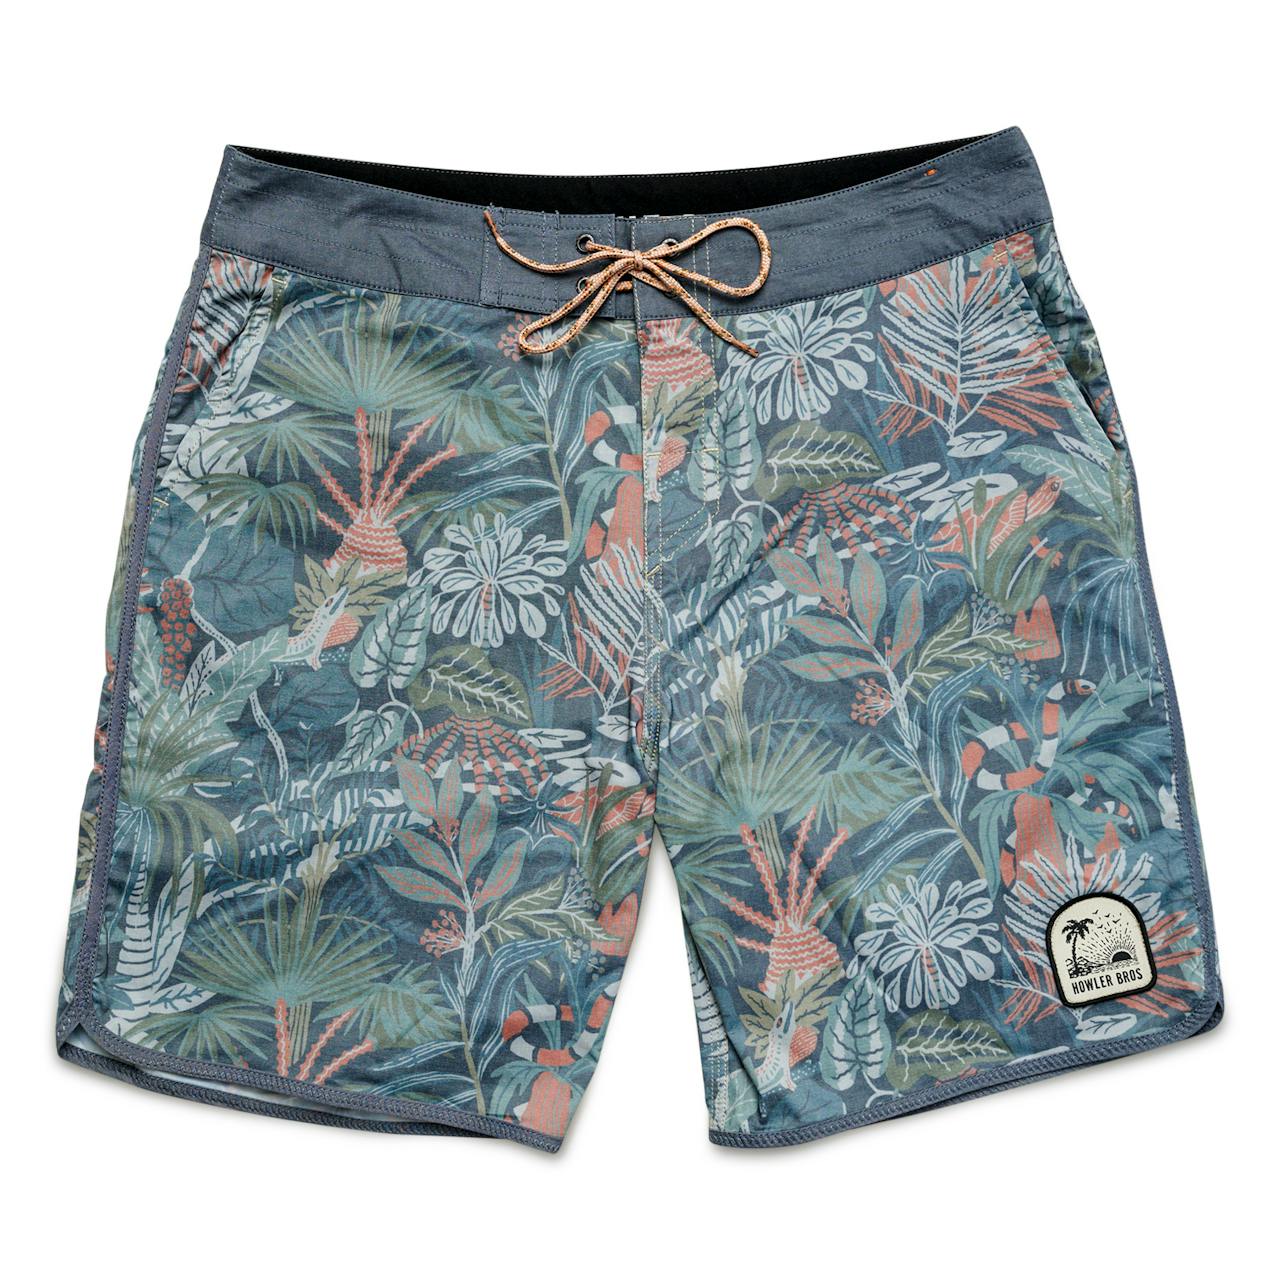 Howler Brothers Stretch Bruja Boardshorts - Glades